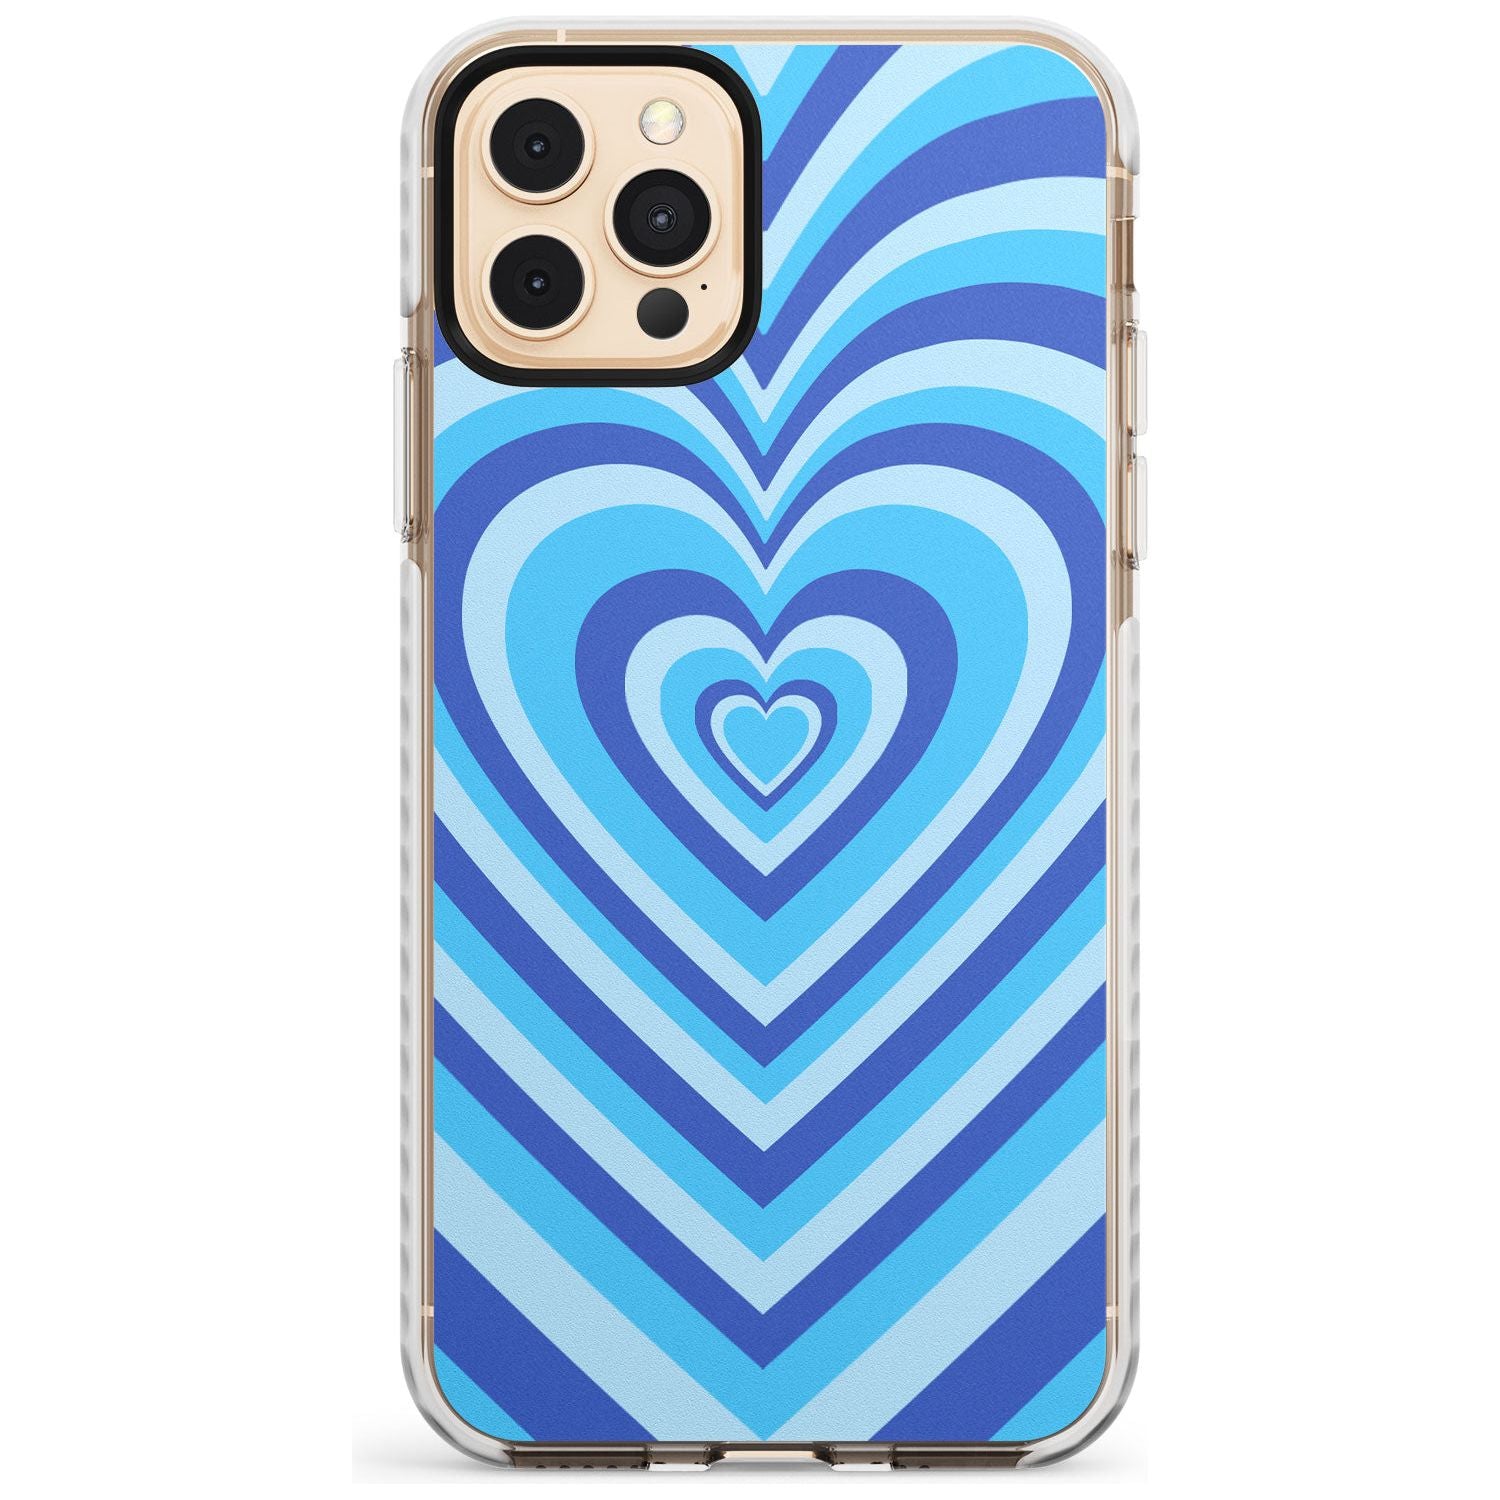 Blue Heart Illusion Impact Phone Case for iPhone 11 Pro Max